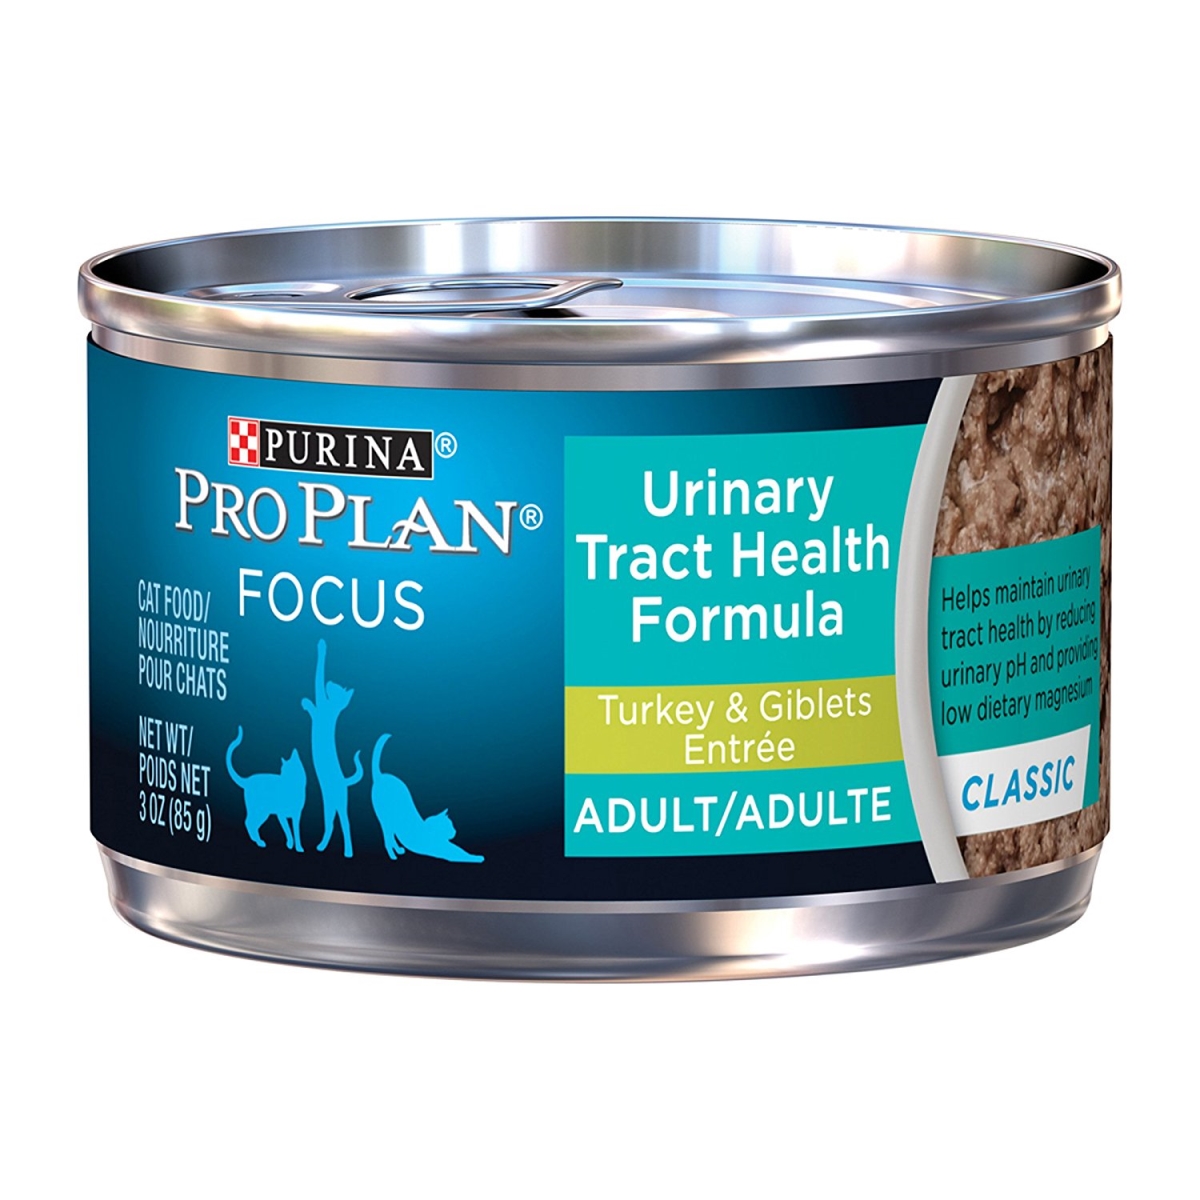 381375 5.5 Oz. Pro Plan Focus Urinary Tract Health Formula Turkey & Giblets For Cat, Pack Of 24